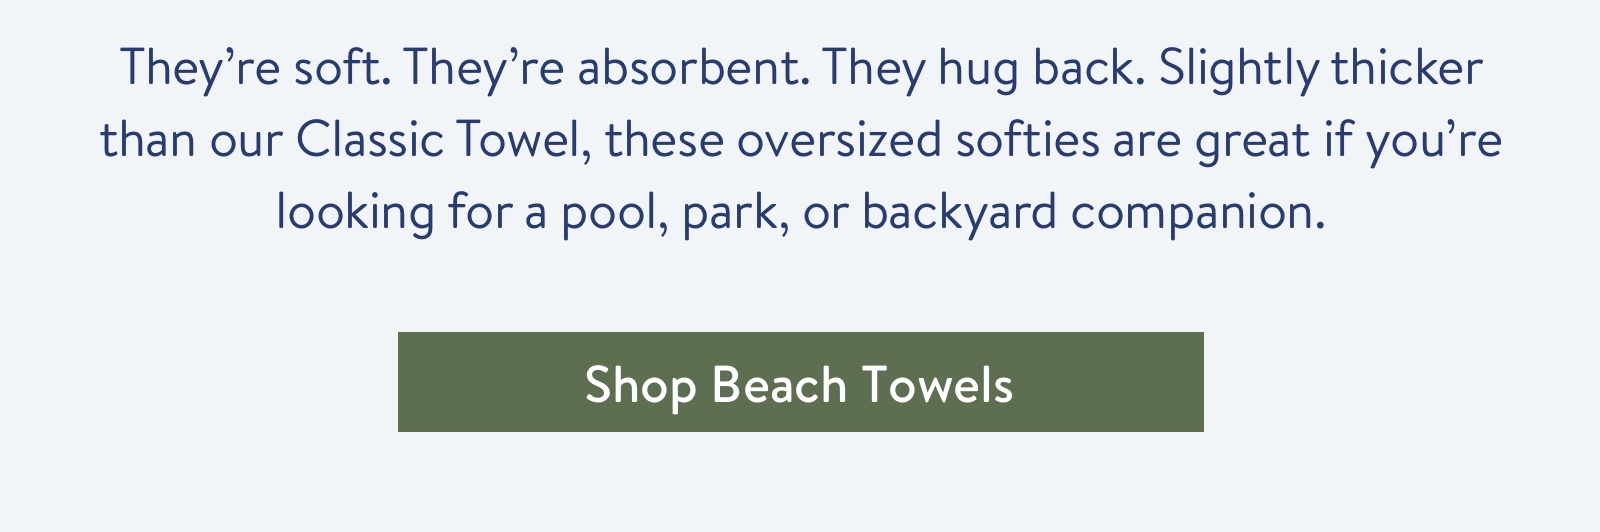 They're soft. They're absorbent. They hug back. Slightly thicker than our Classic Towel, these oversized softies are great if you're looking for a pool, park, or backyard companion.